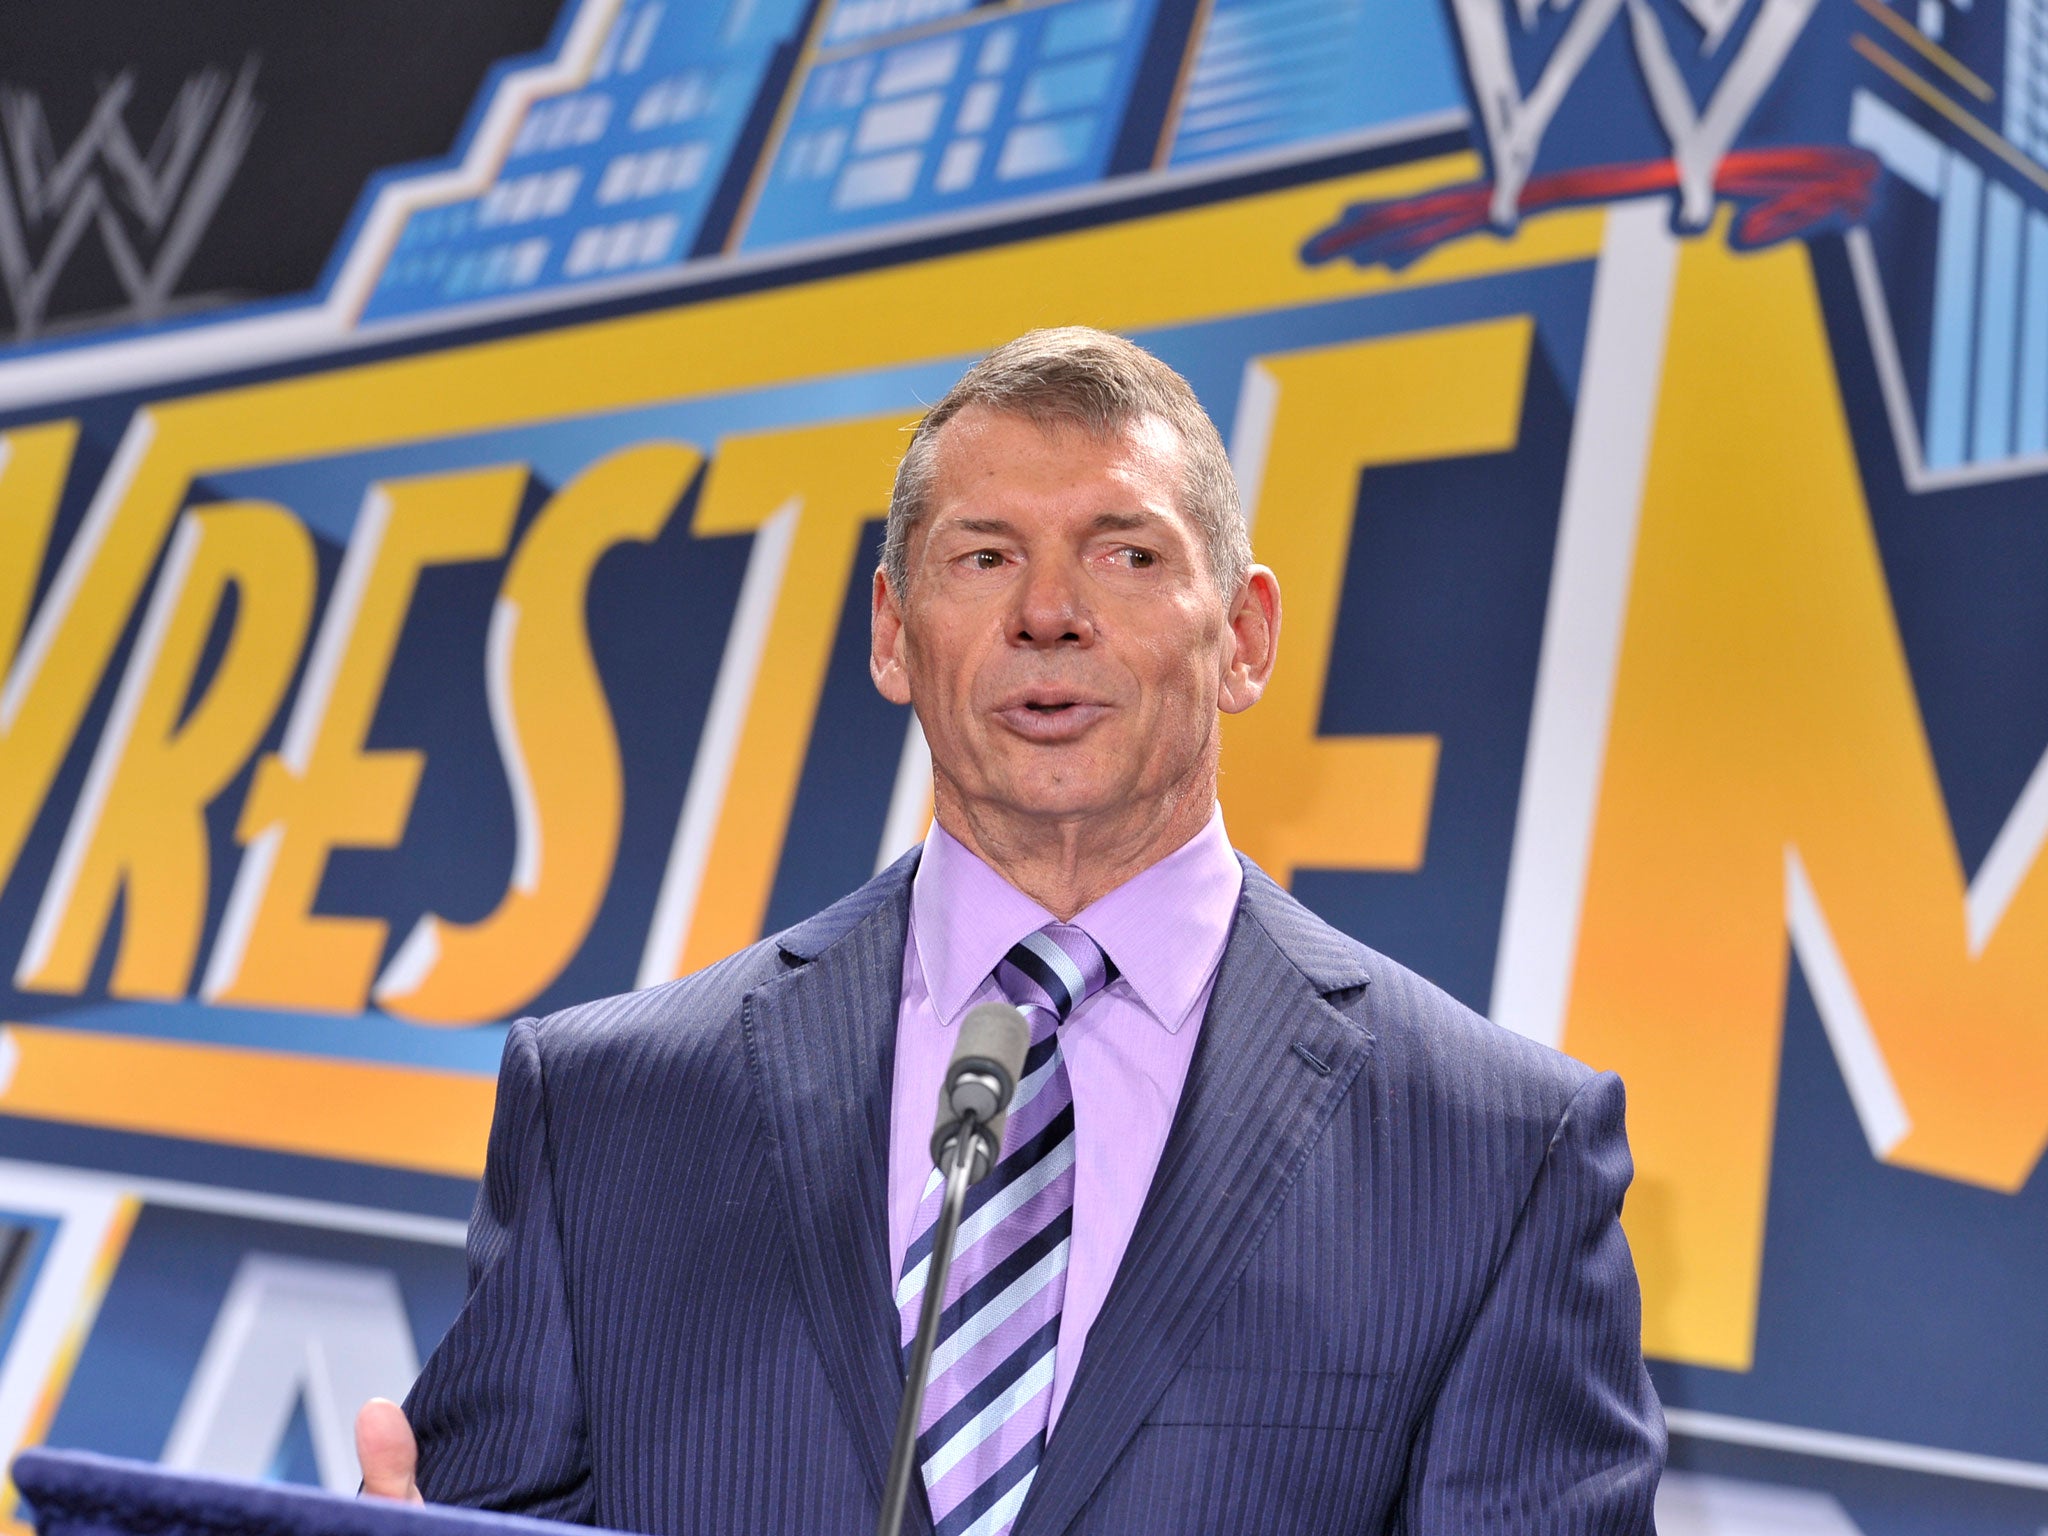 Vince McMahon has been reported to be considering a takeover bid for Premier League club Newcastle United